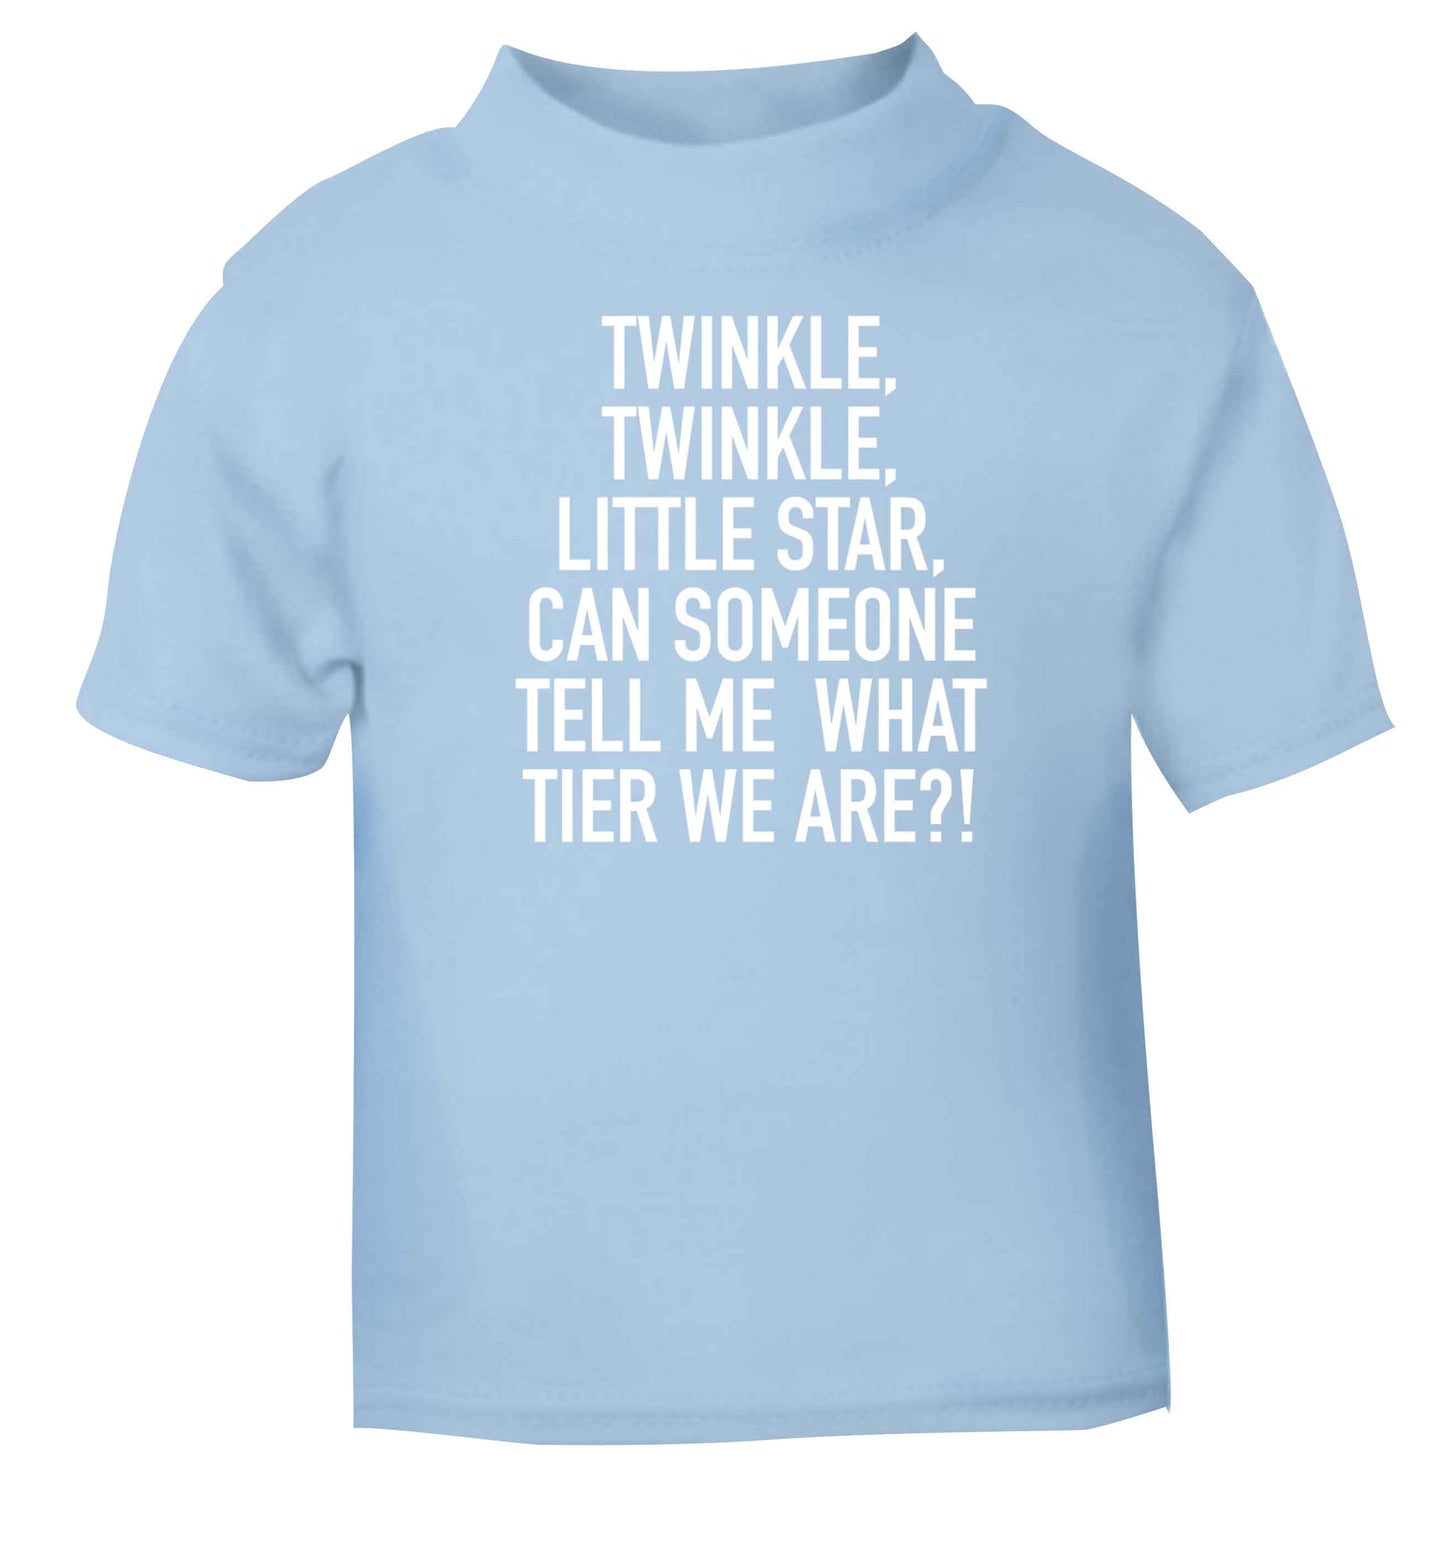 Twinkle twinkle, little star does anyone know what tier we are? light blue baby toddler Tshirt 2 Years